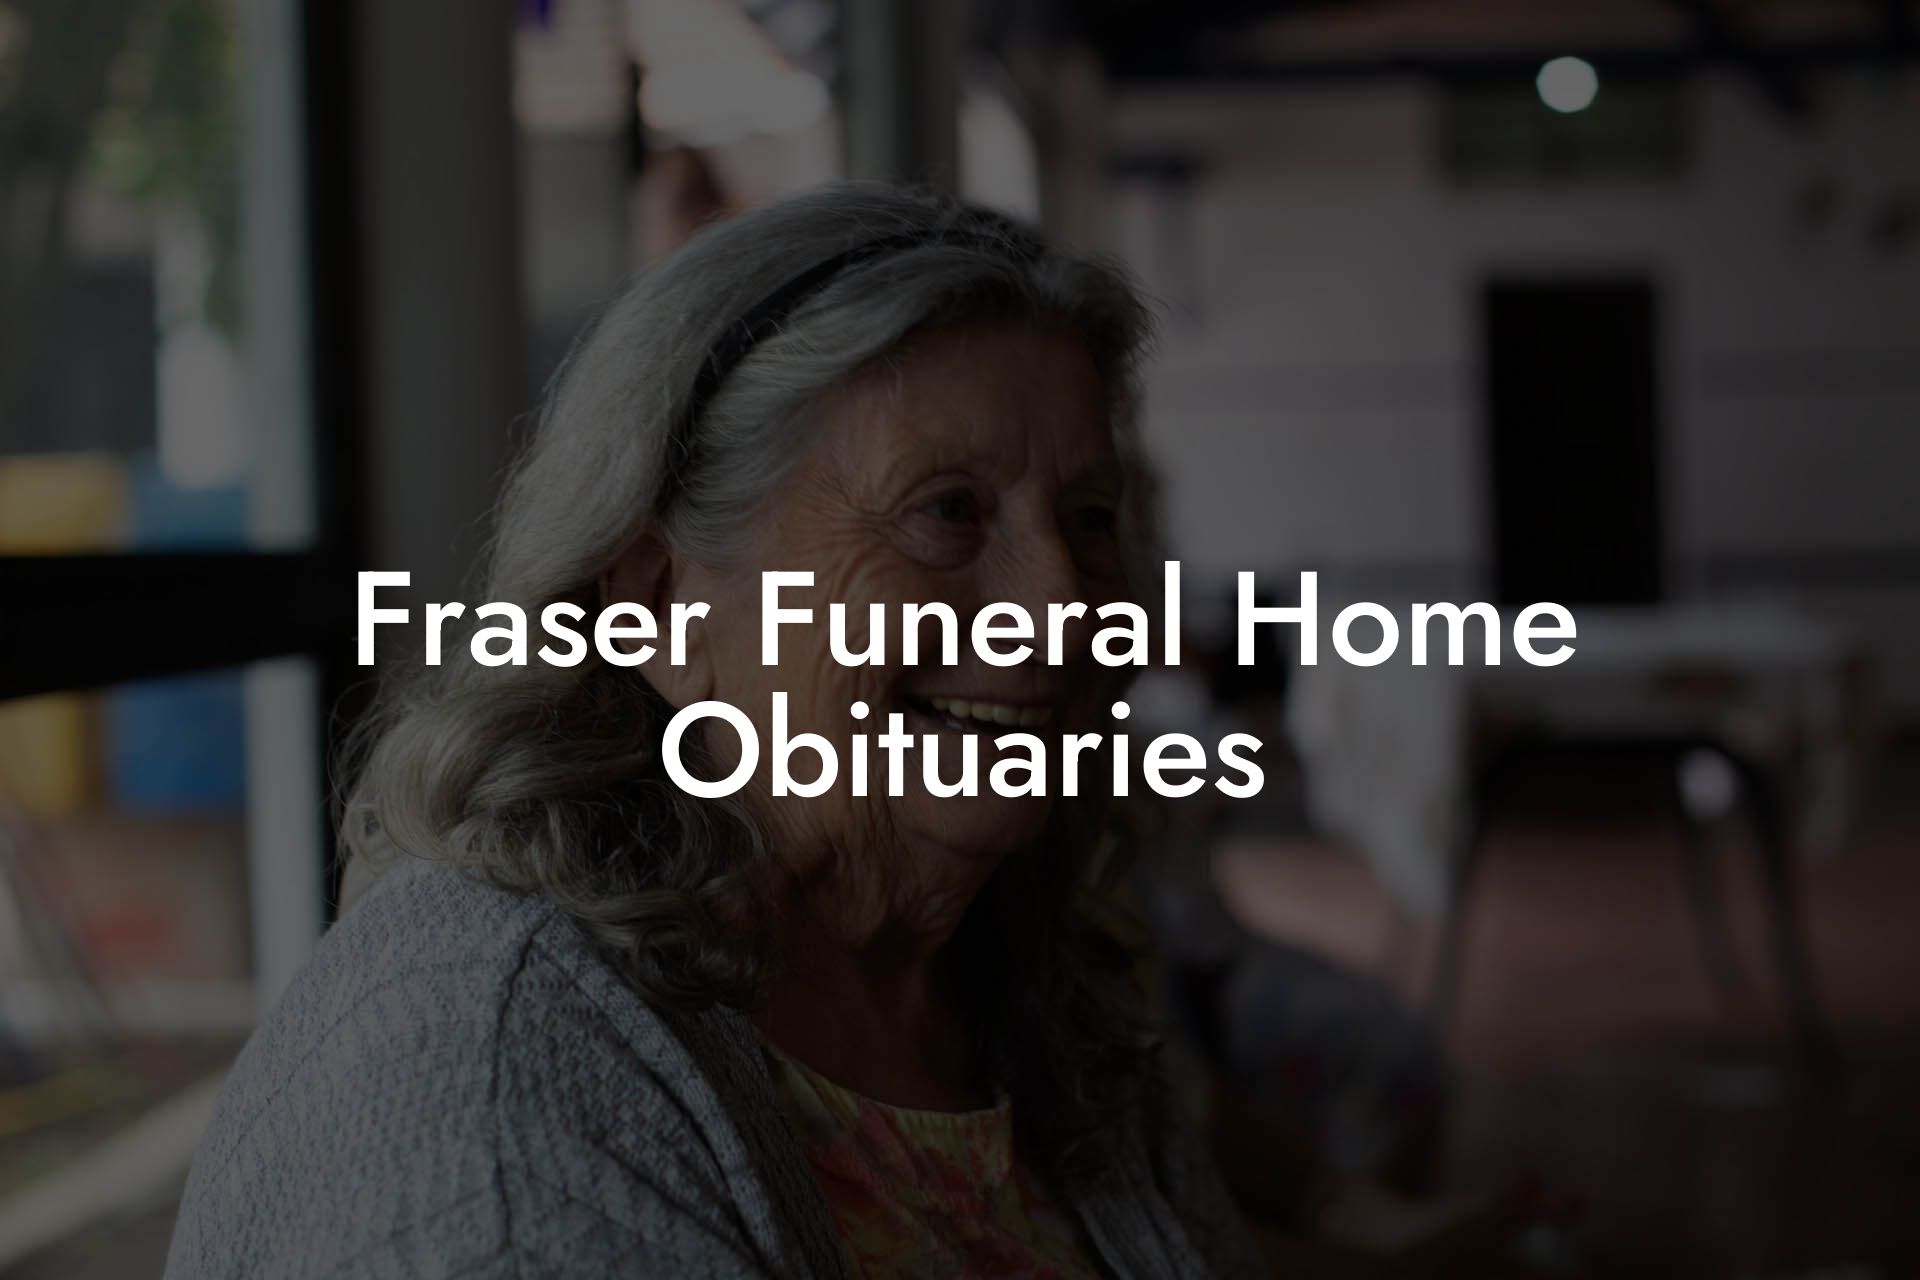 Fraser Funeral Home Obituaries